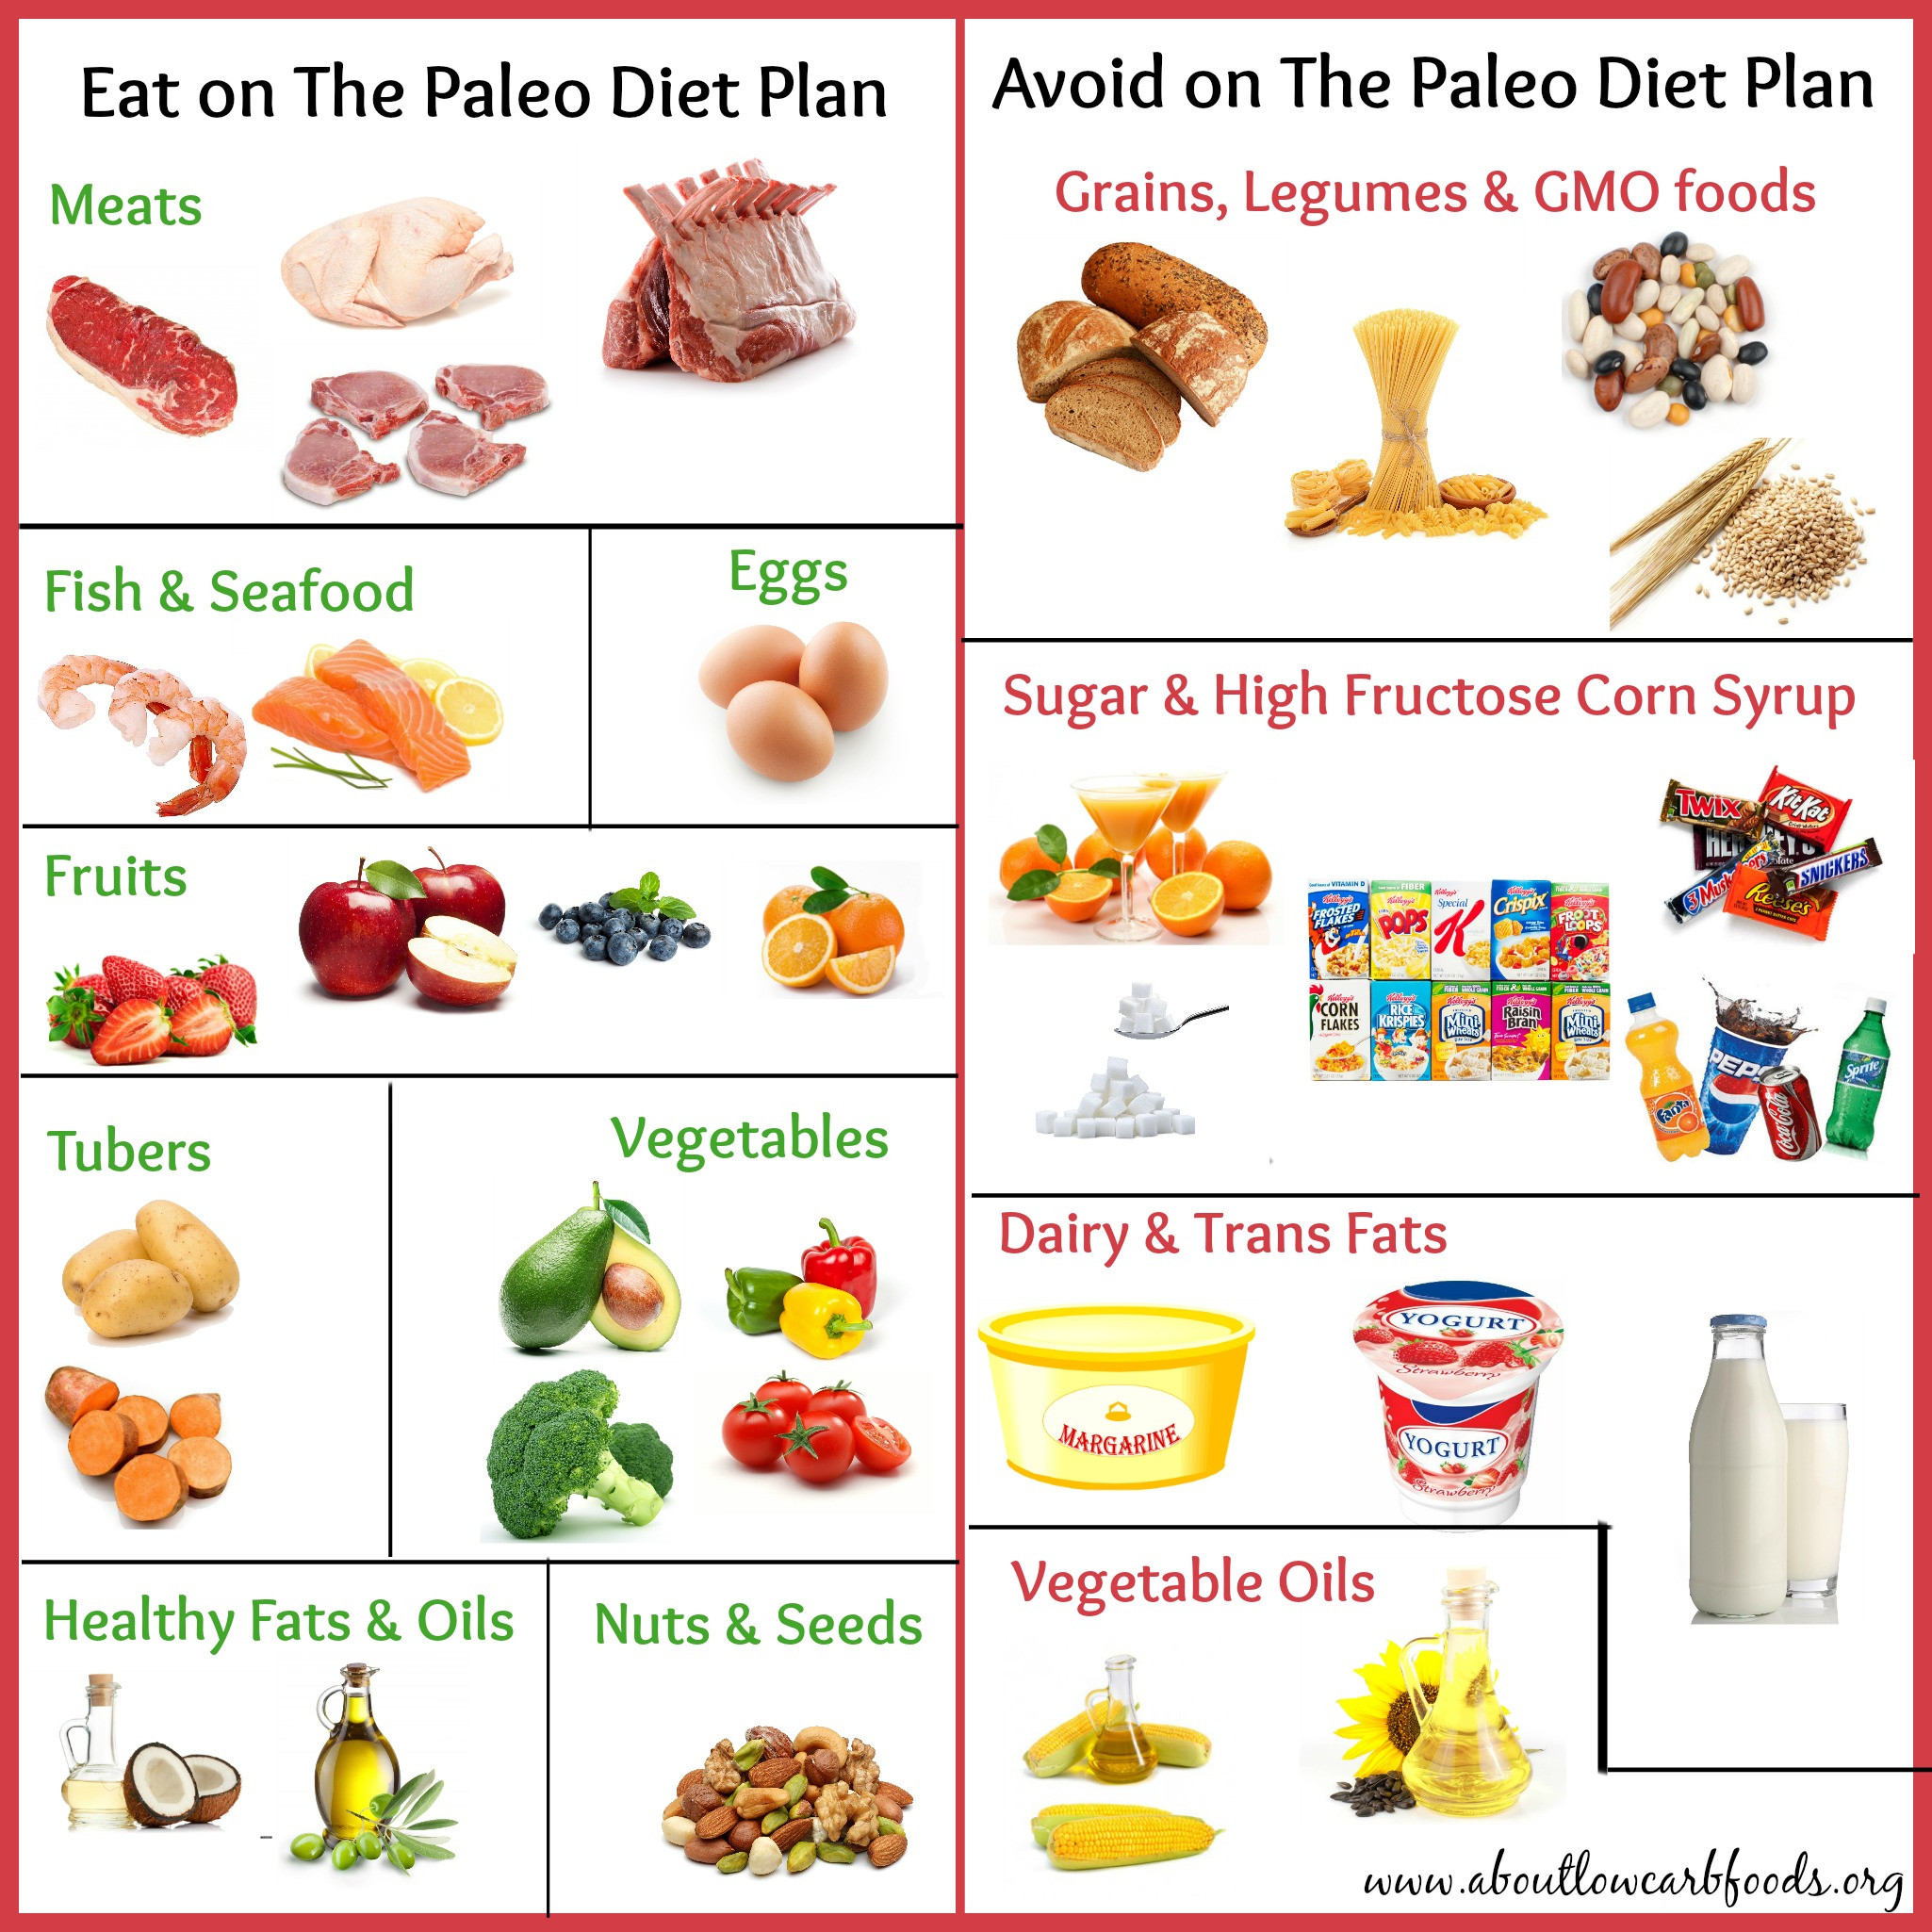 Foods In The Paleo Diet
 Paleo Diet Meal Plan Why It’s So Popular About Low Carb